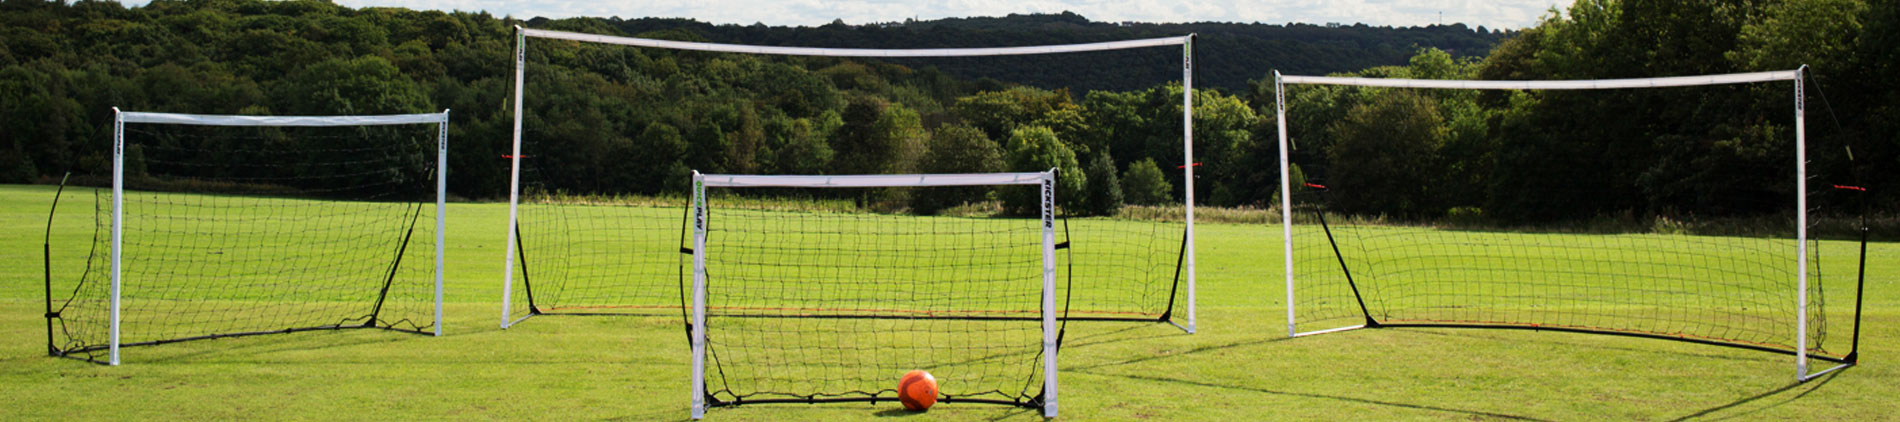 Soccer Nets of Different Sizes displayed on a football pitch